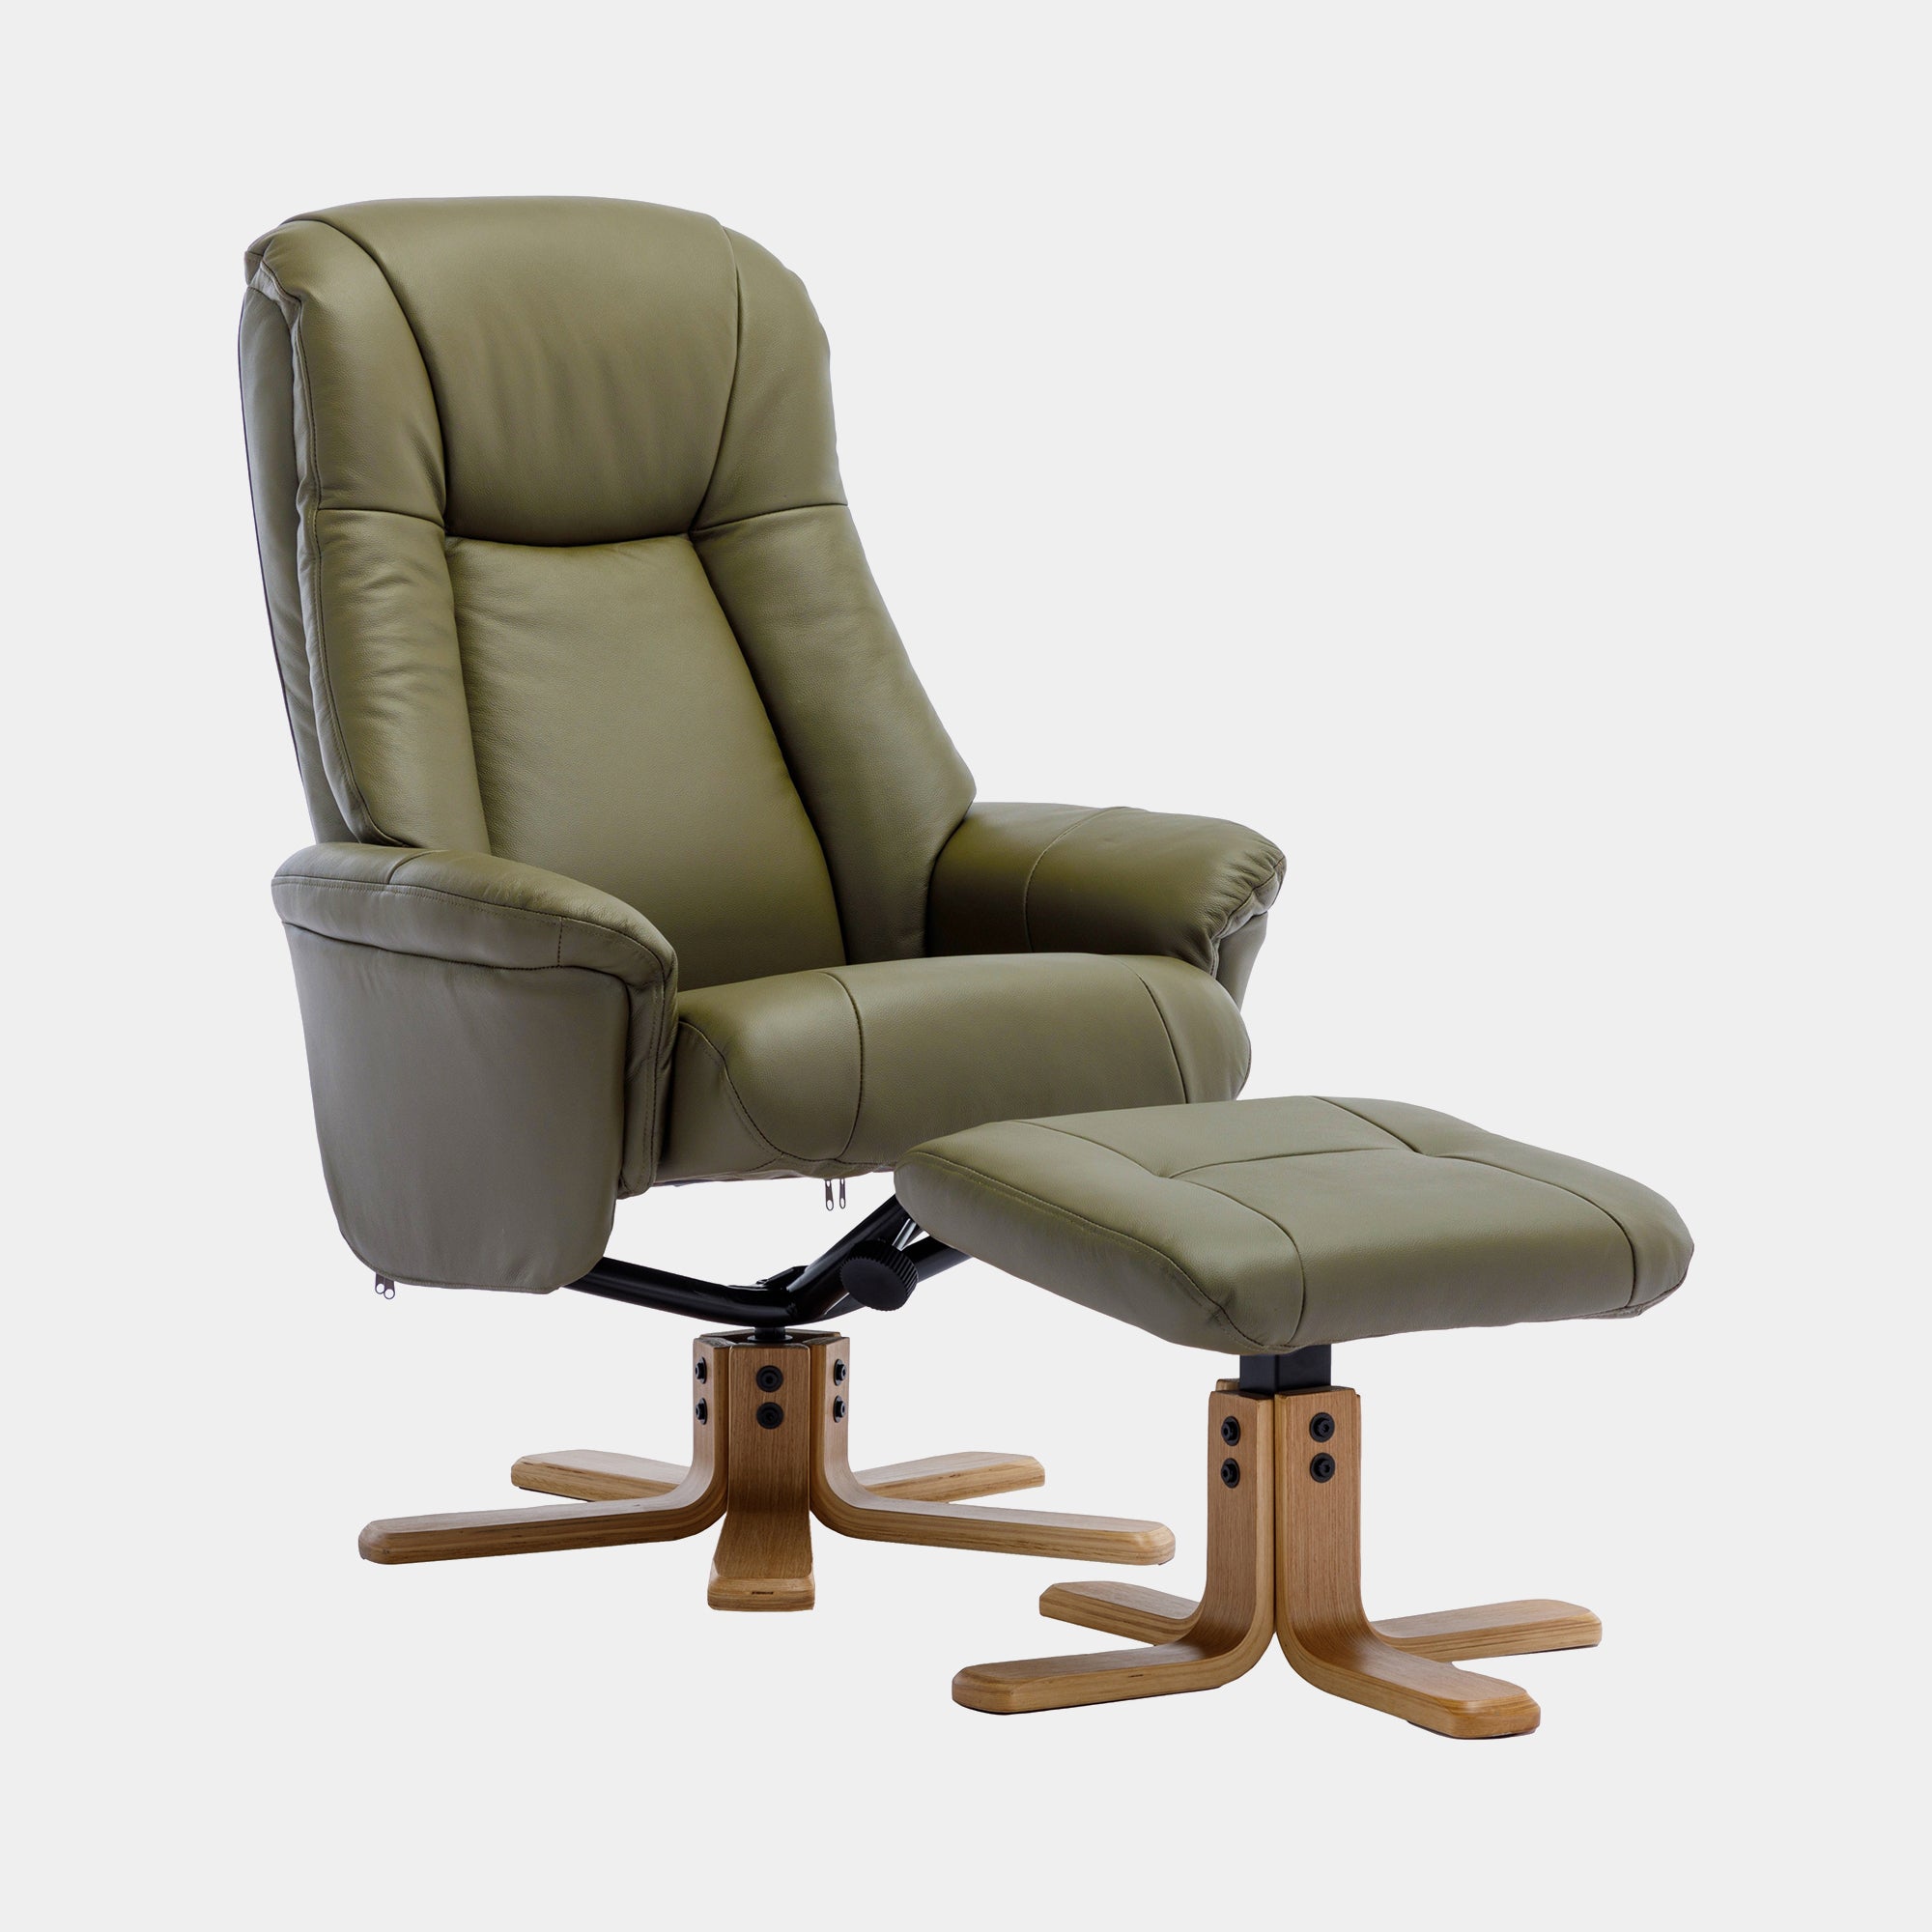 Sierra - Swivel Chair & Stool In Leather Match Olive Green With Mid Oak Base